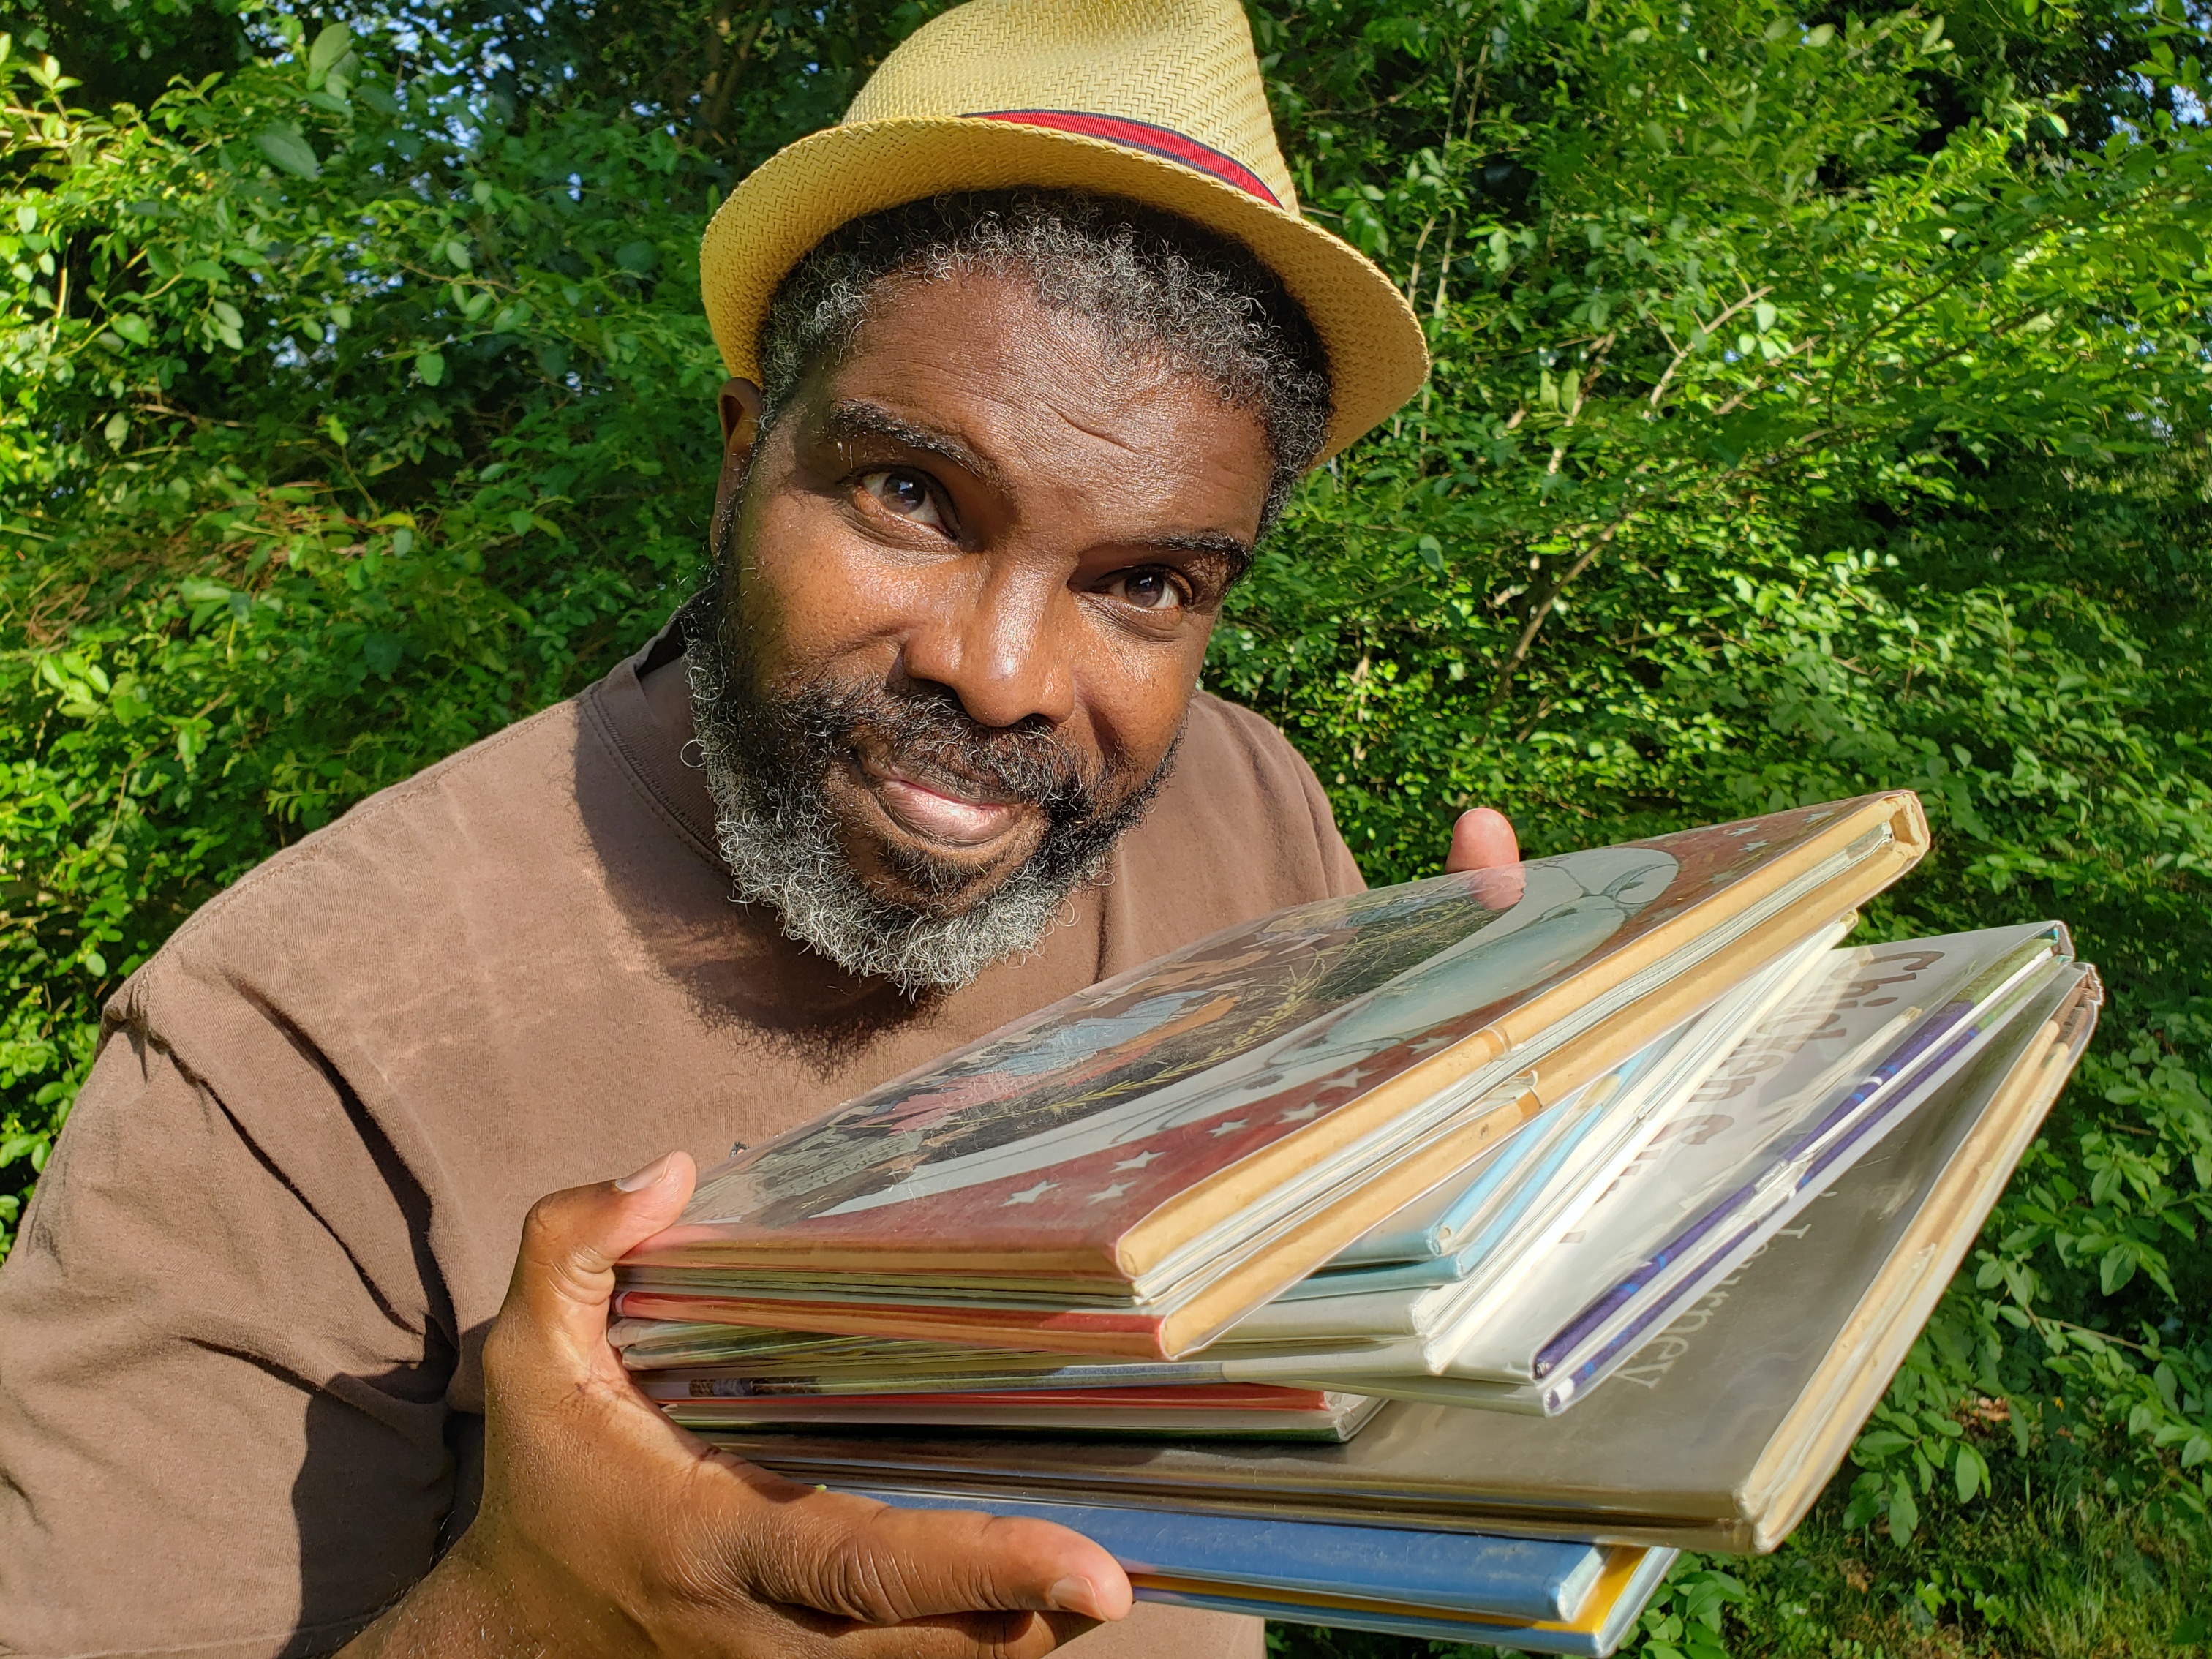 Darion McCloud is a Black man.  He is standing in front of green bushes.  He wears a brown t-shirt and a straw hat.  He is holding a stack of picture books towards the viewer.  His hair and beard are salt and pepper and he shares a slight smile.  